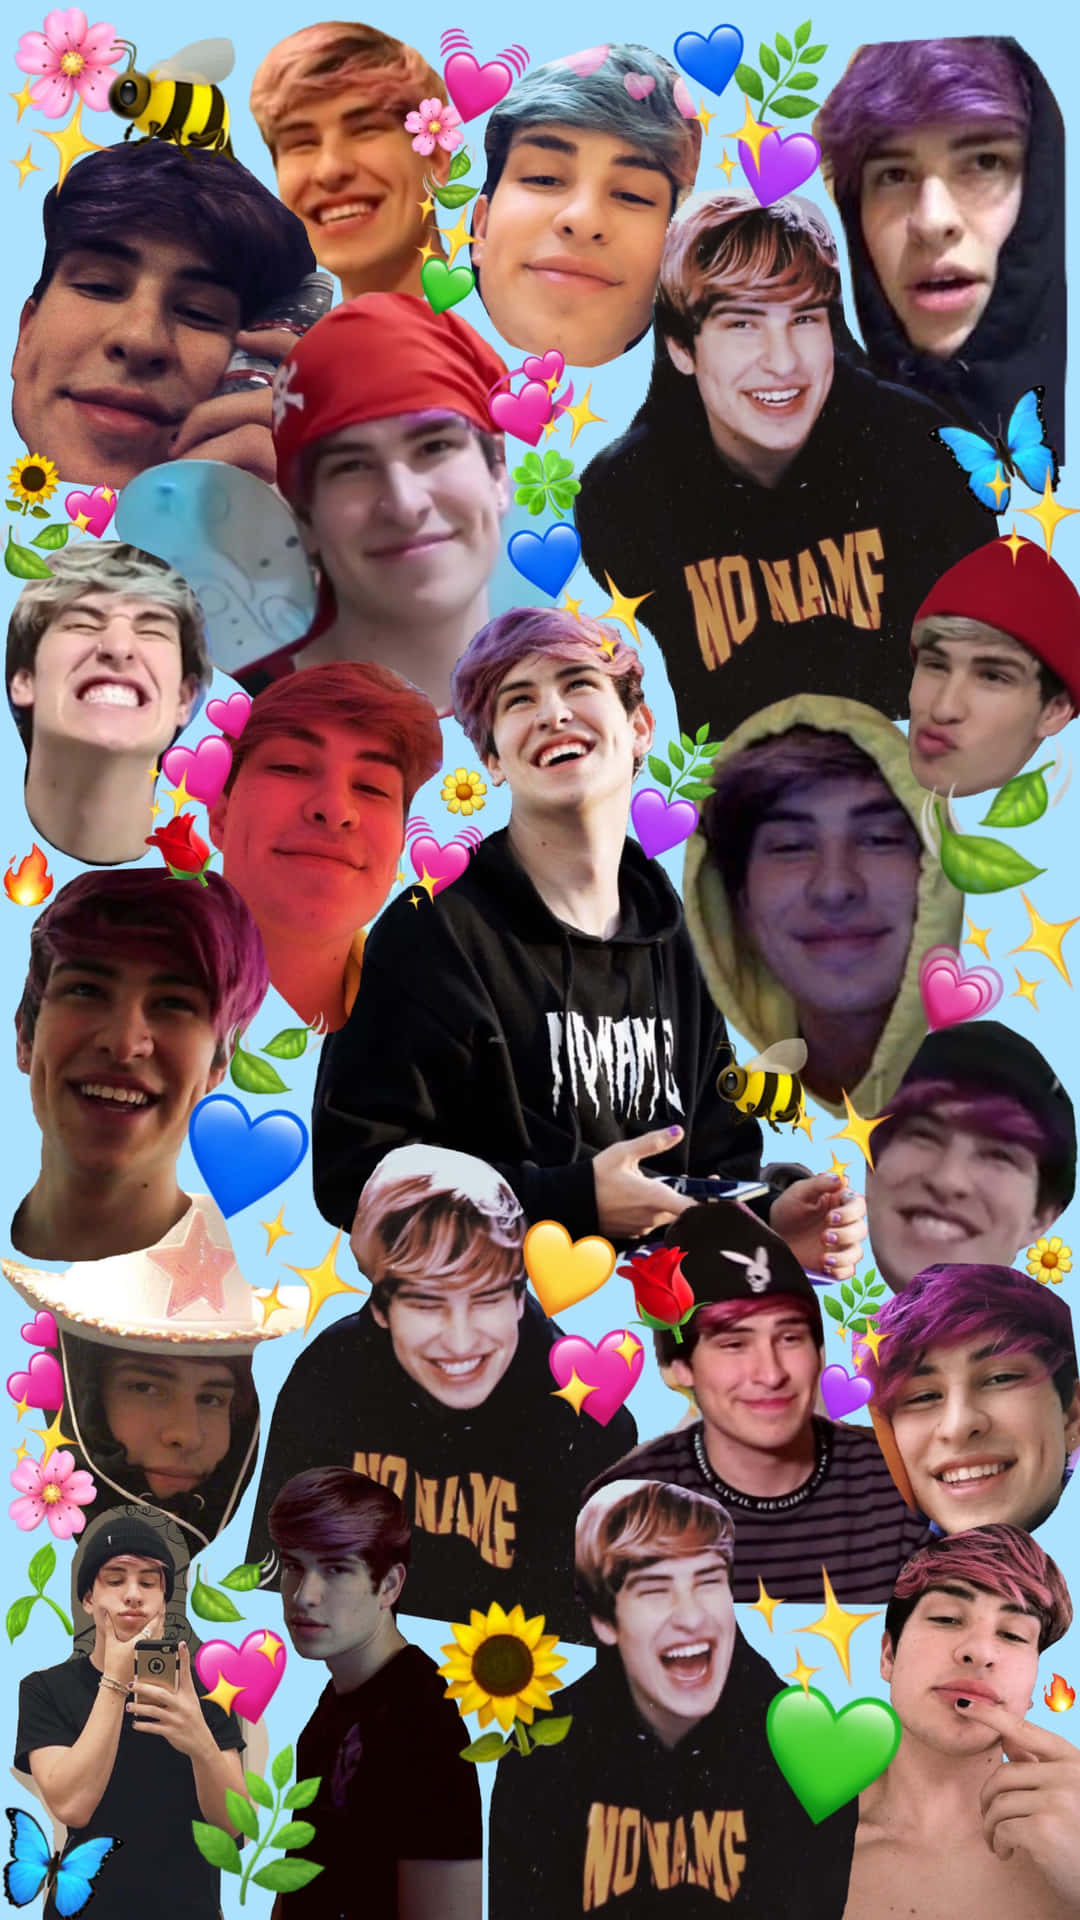 A Collage Of Pictures Of A Man With A Hat Wallpaper